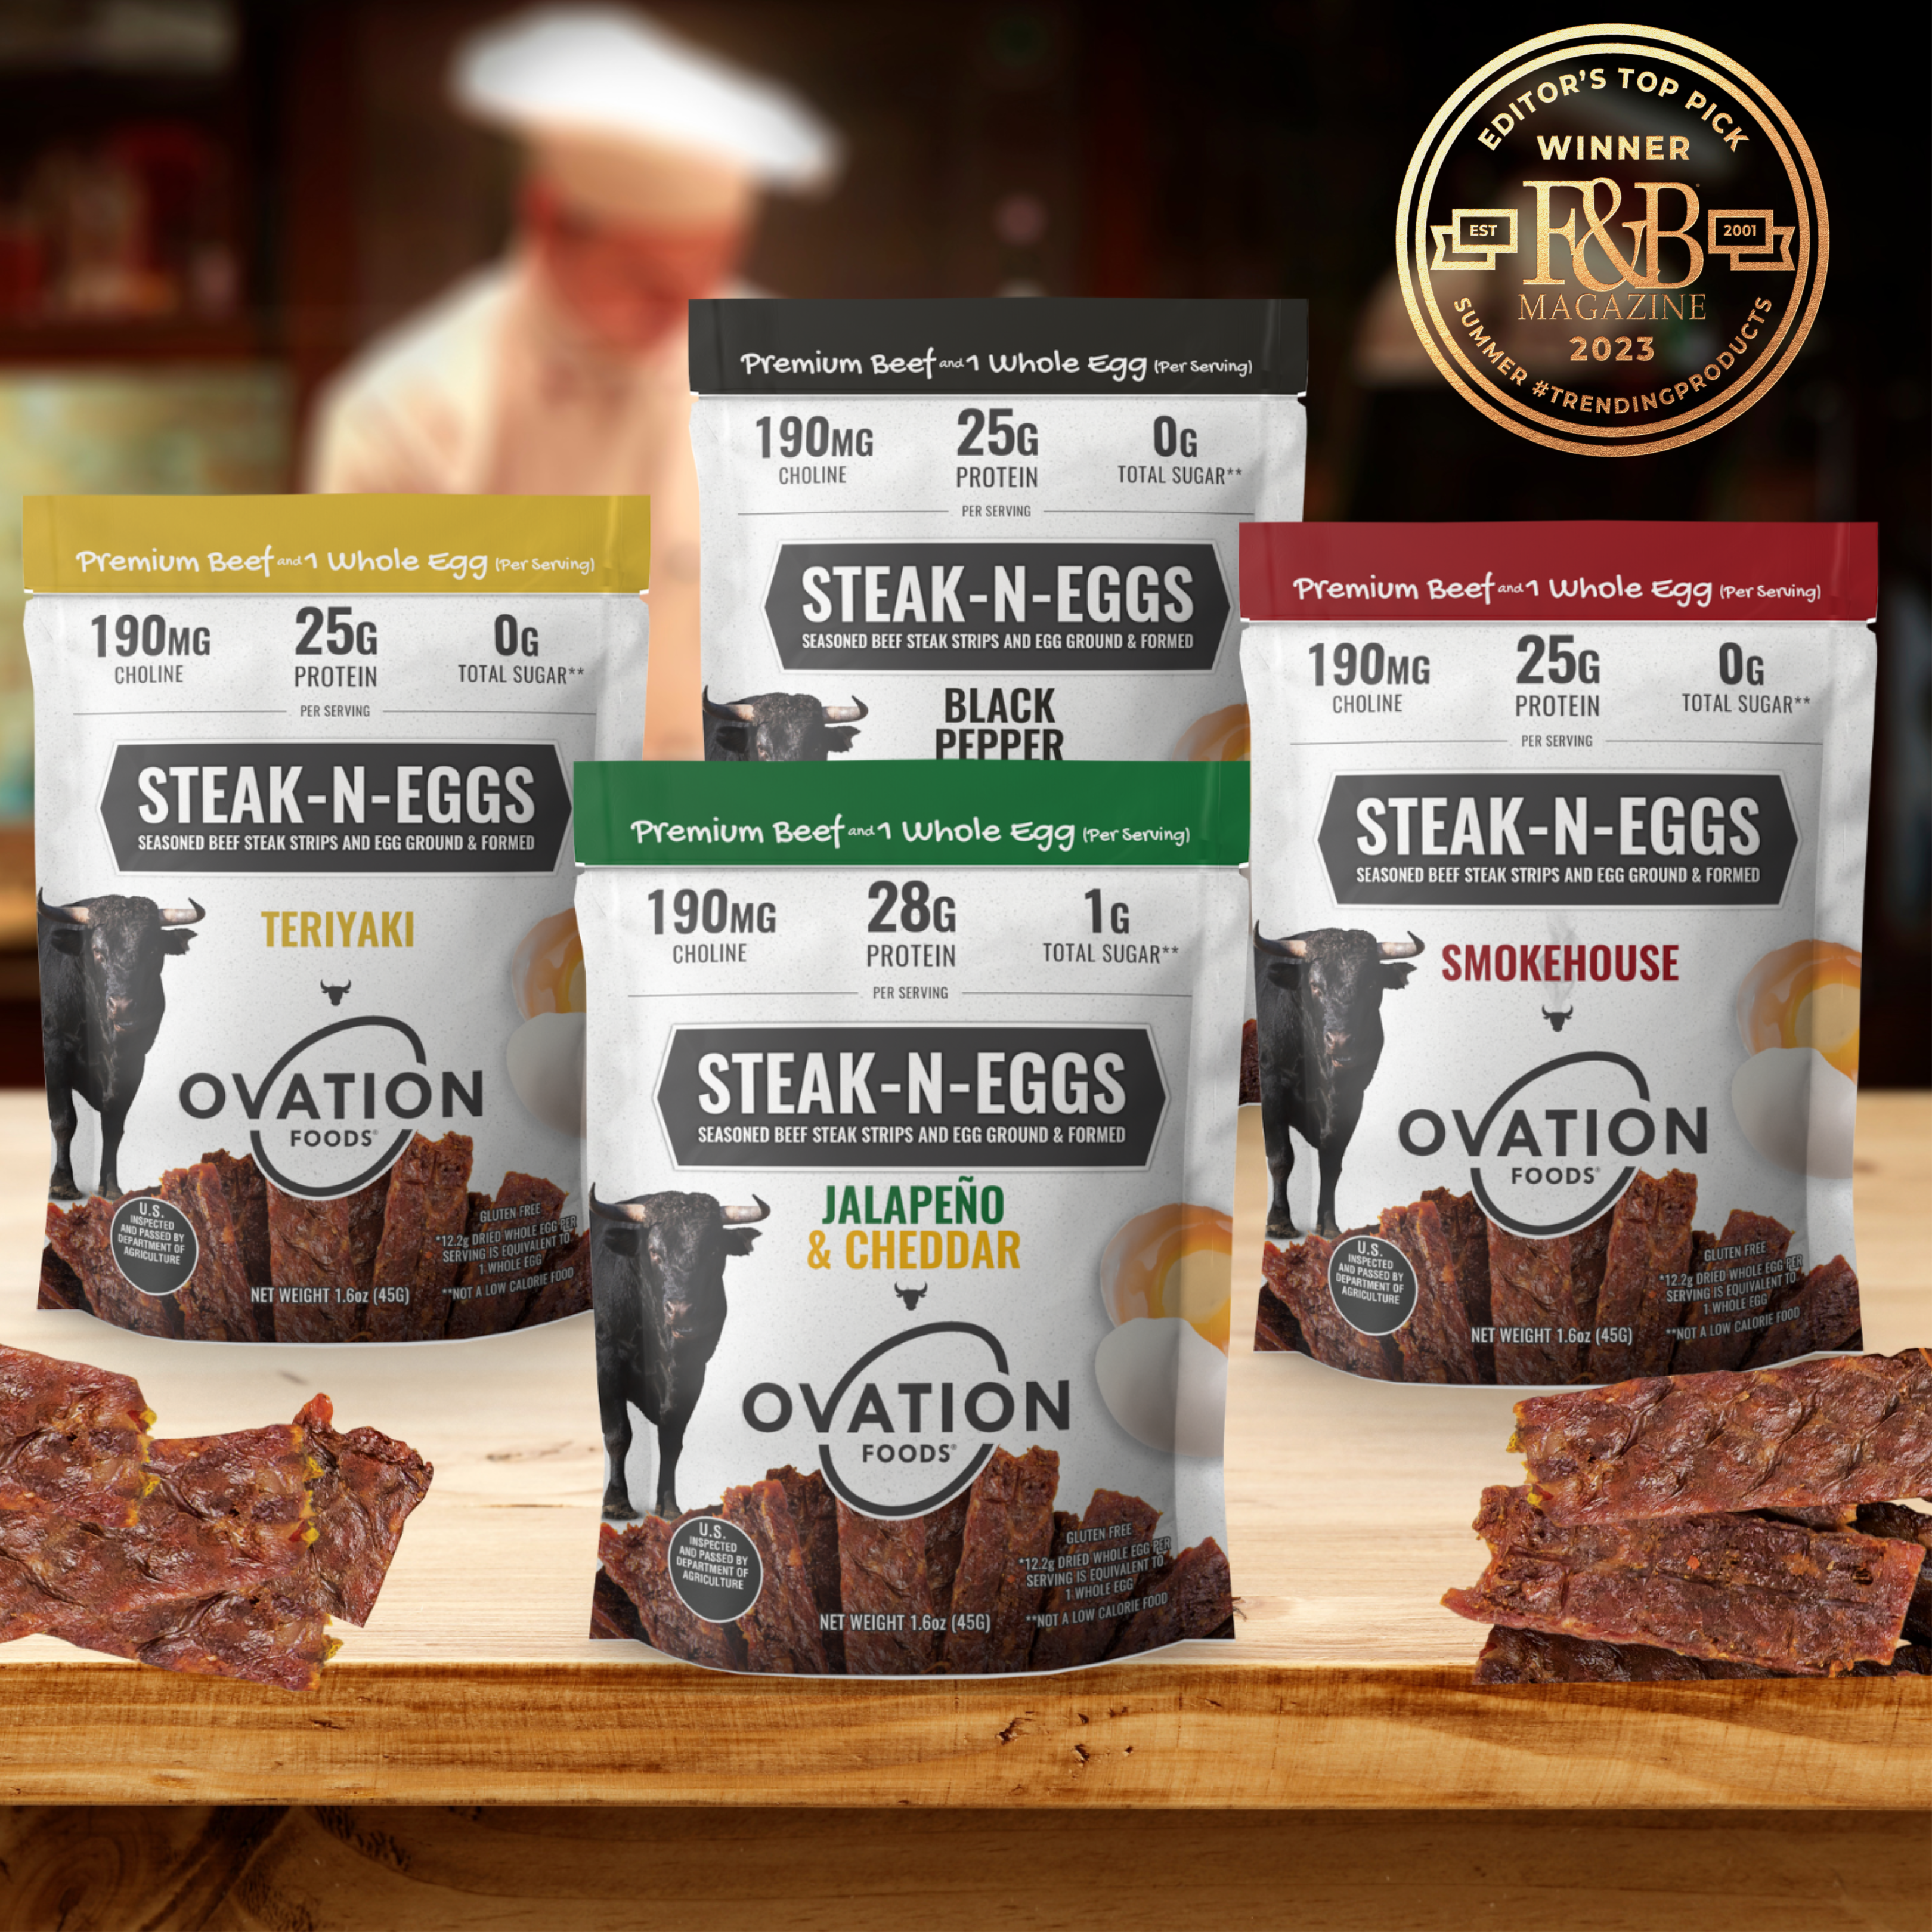 Award Winning Steak-N-Eggs premium lean beef meat snacks with one whole egg launching into October 1st in Sprouts Farmers Markets. Delicious nutrient-dense snacks with protein and 38 essential nutrients like the essential brain nutrient Choline.